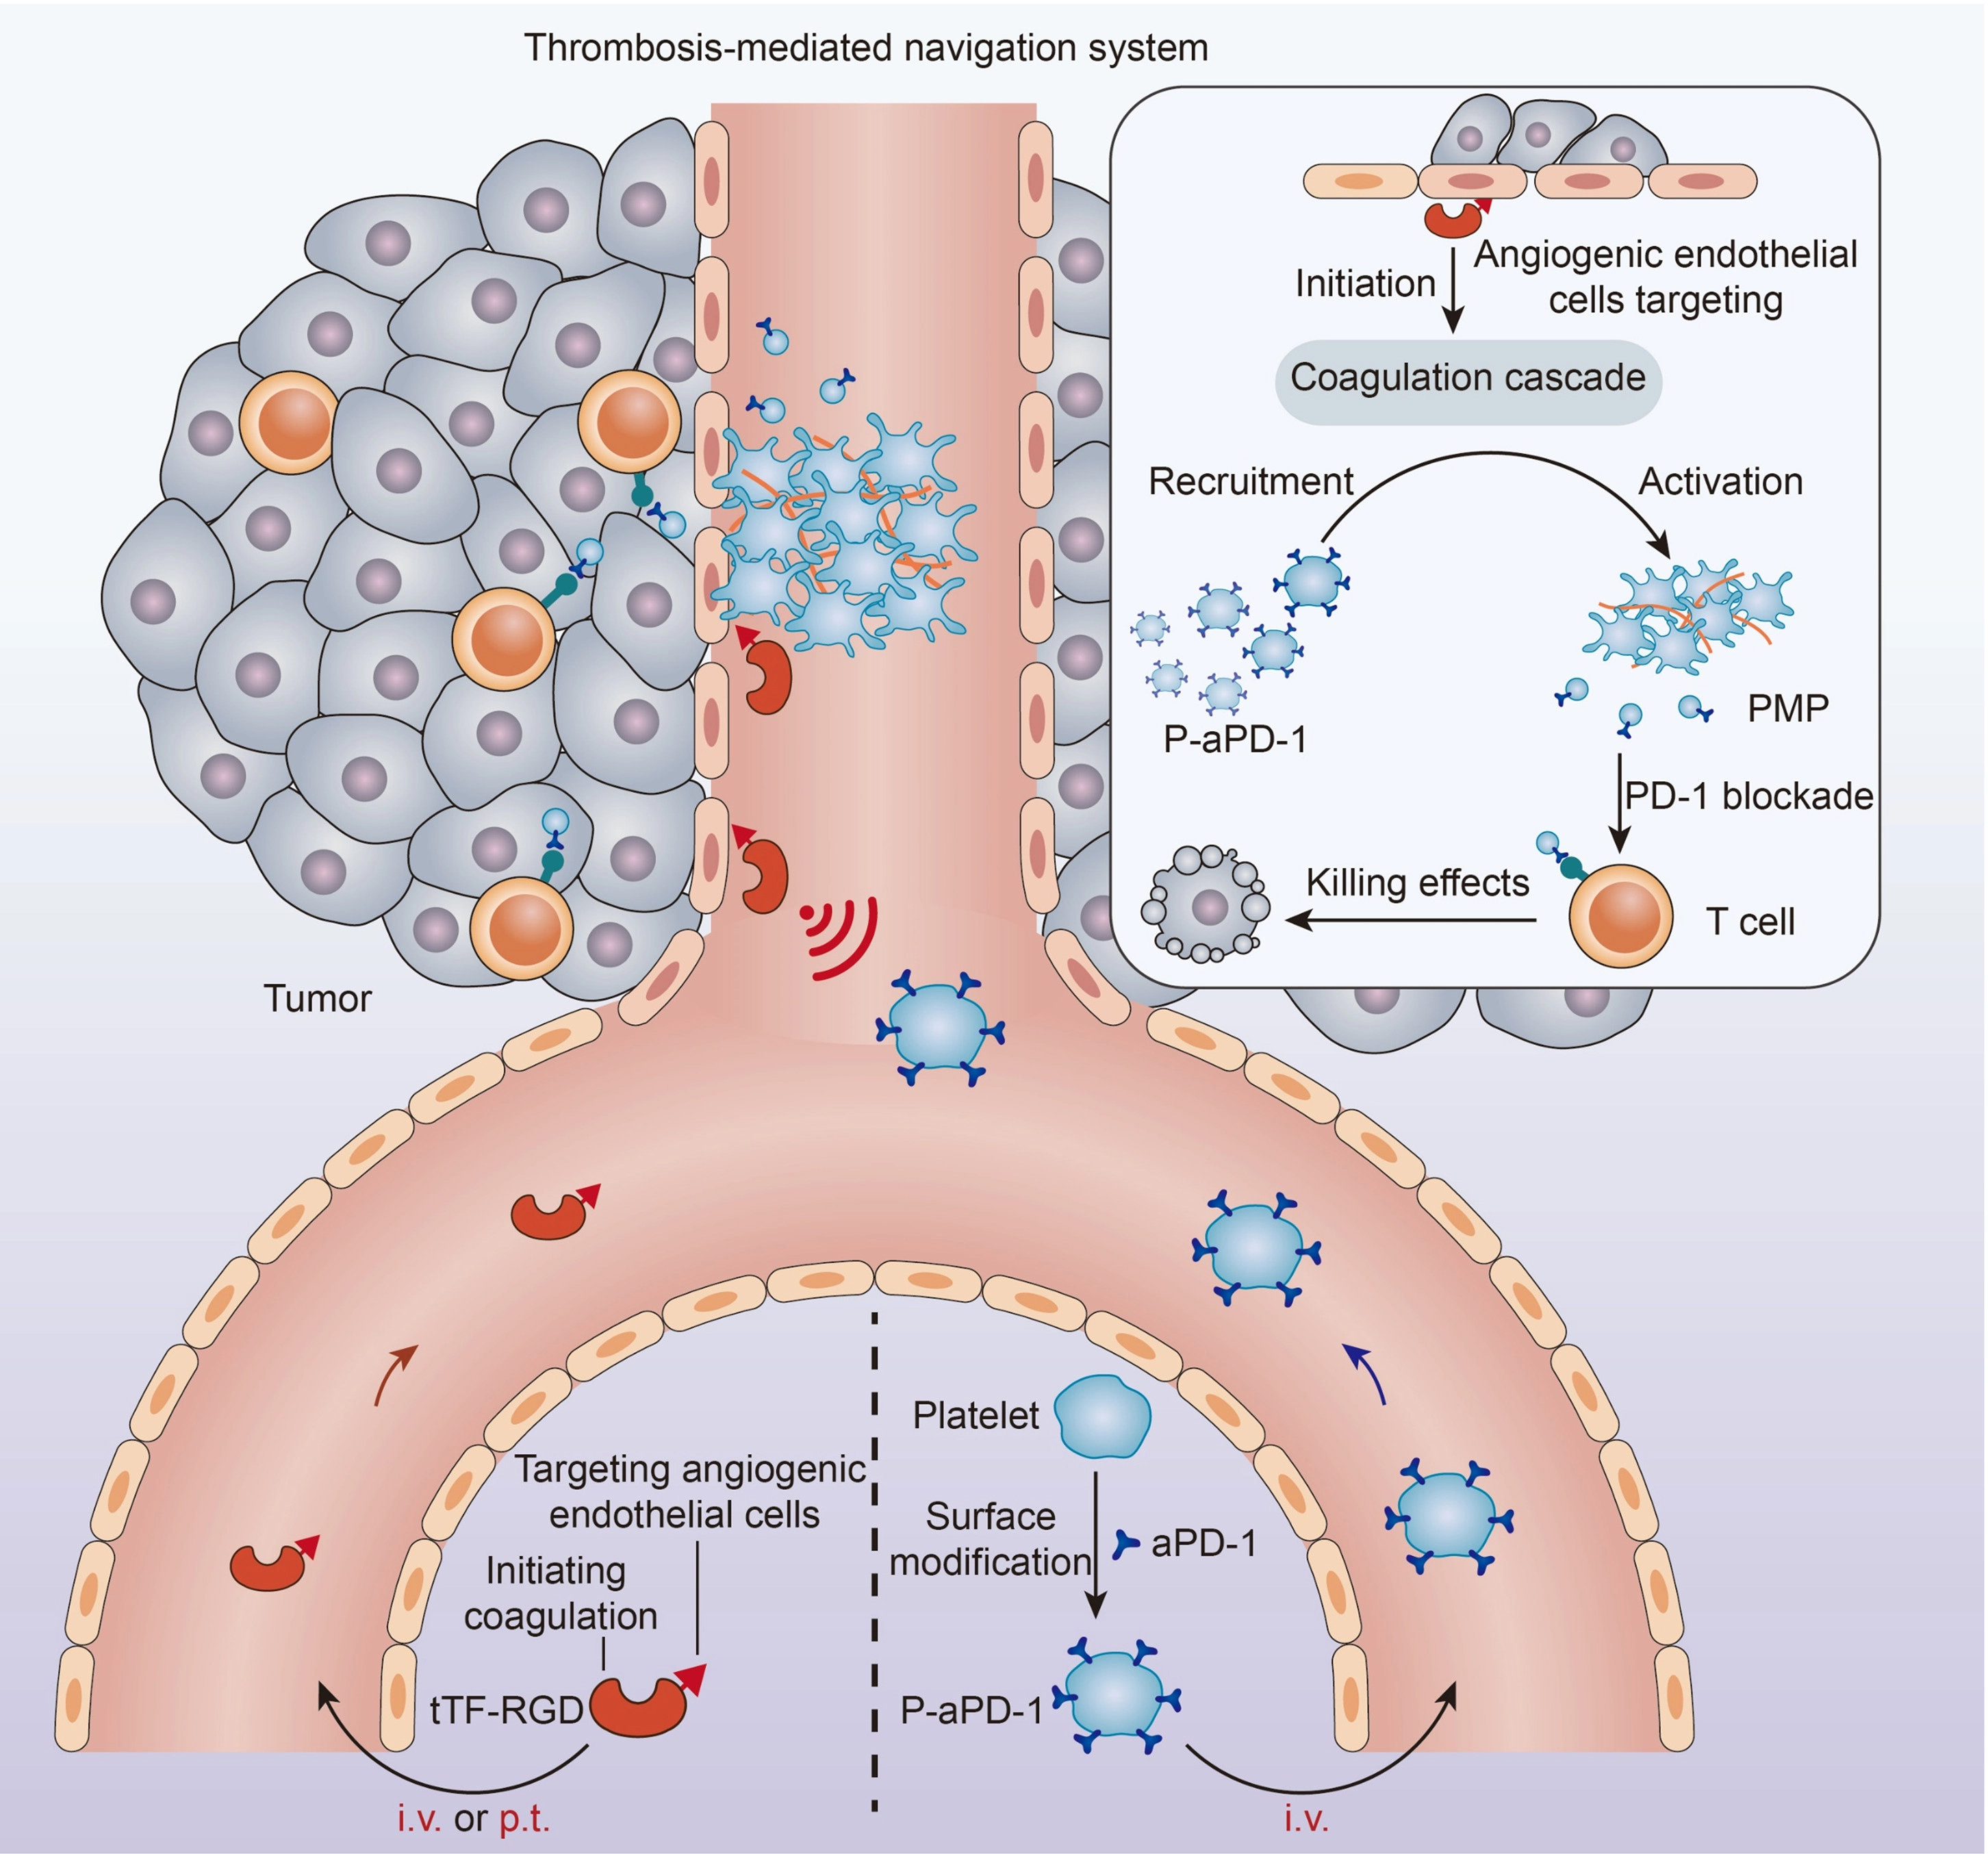 Fig. 1 Schematic of the thrombosis-mediated navigation system for P-aPD-1 (Wang, 2023)